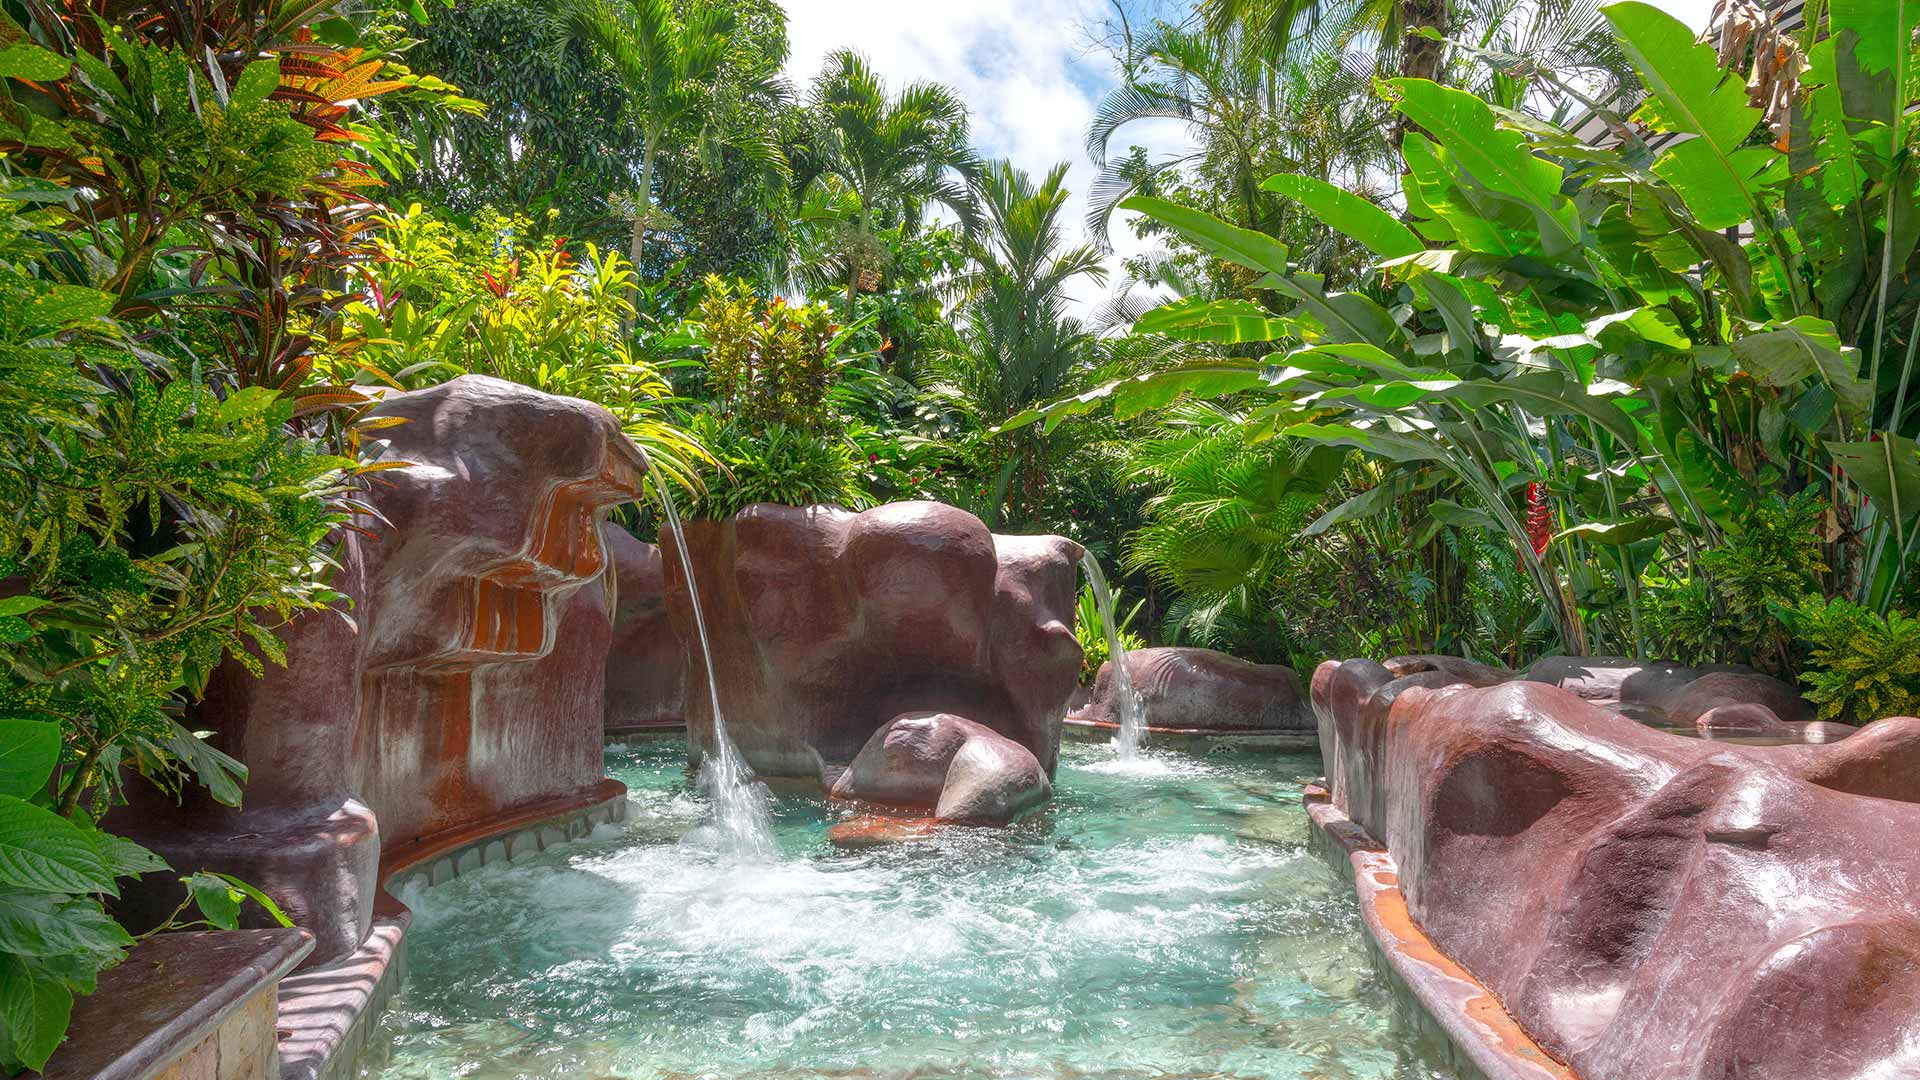 Why pay to visit hot springs when you can stay at a costa rica hot springs...